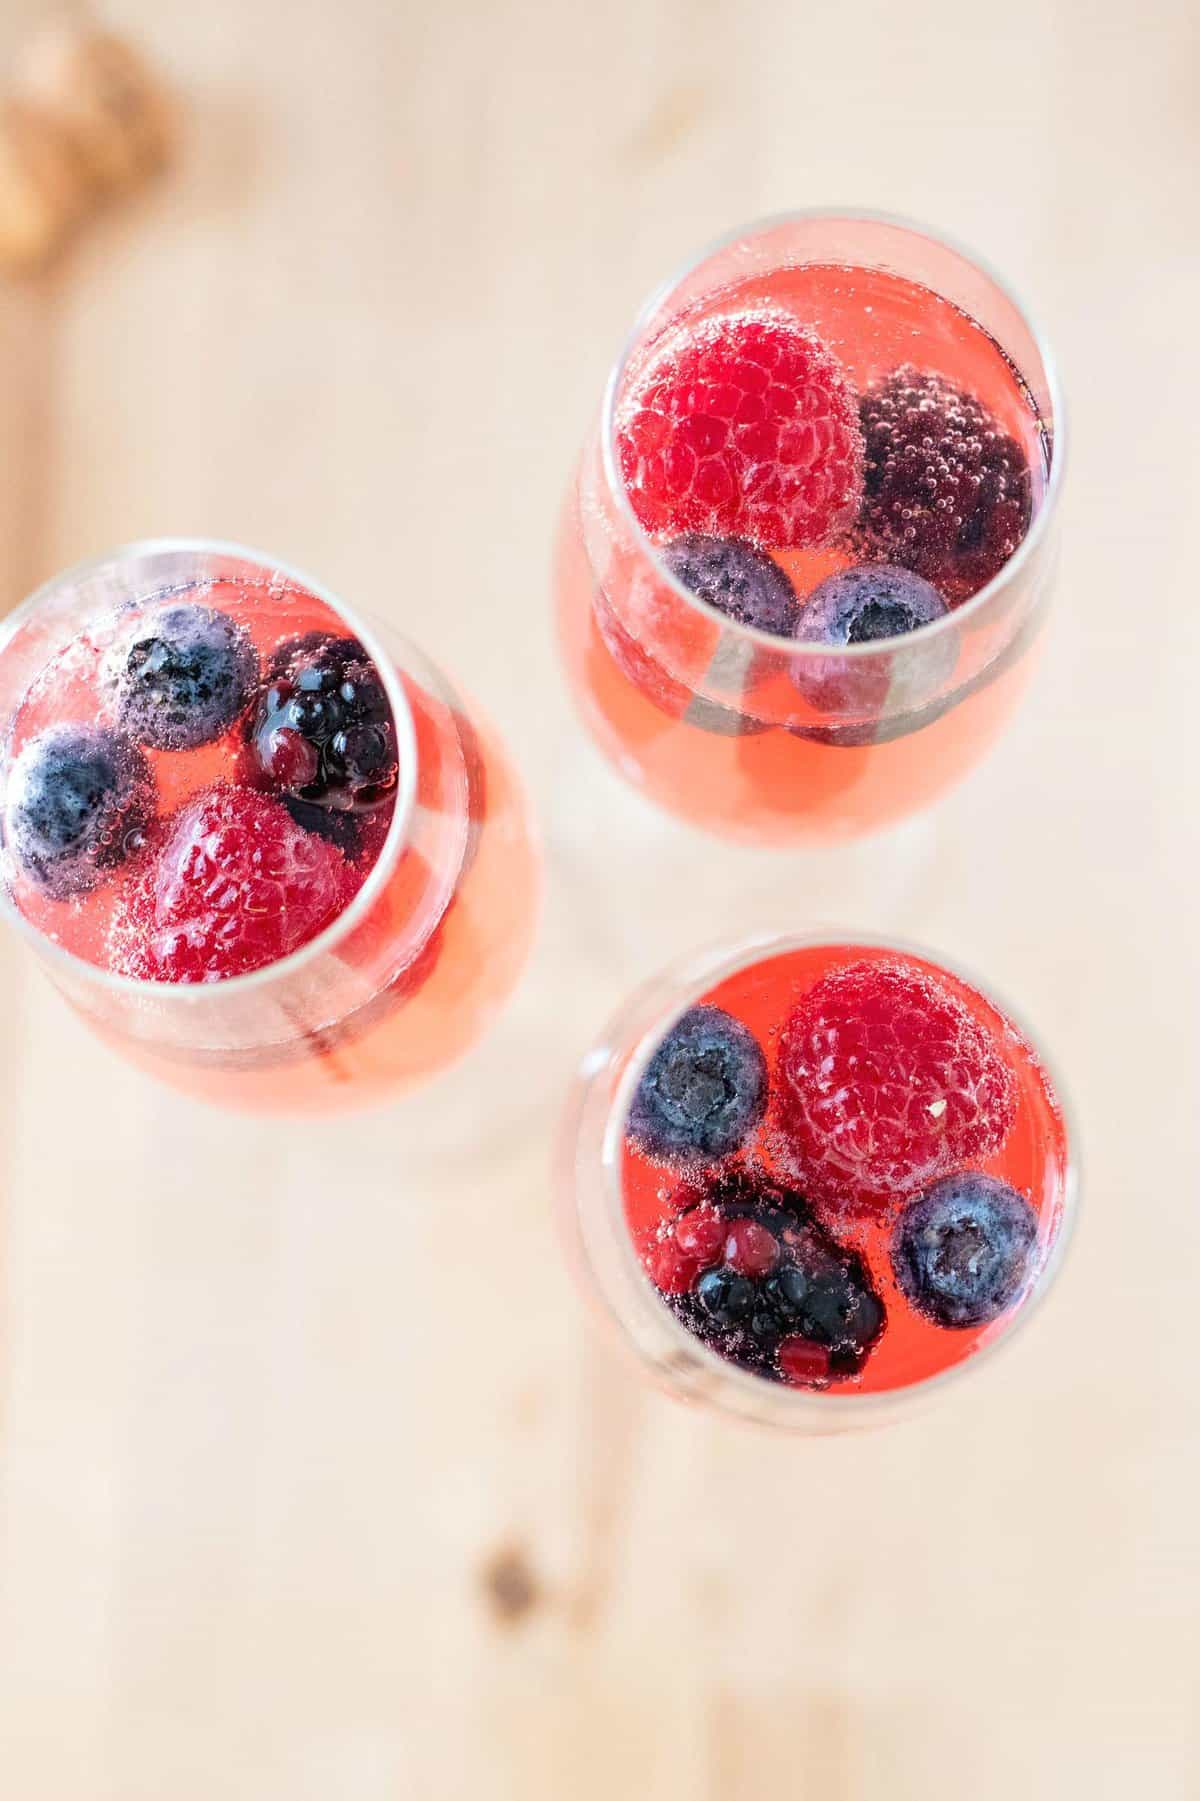  One sip and you'll be transported to a berry patch on a sunny day